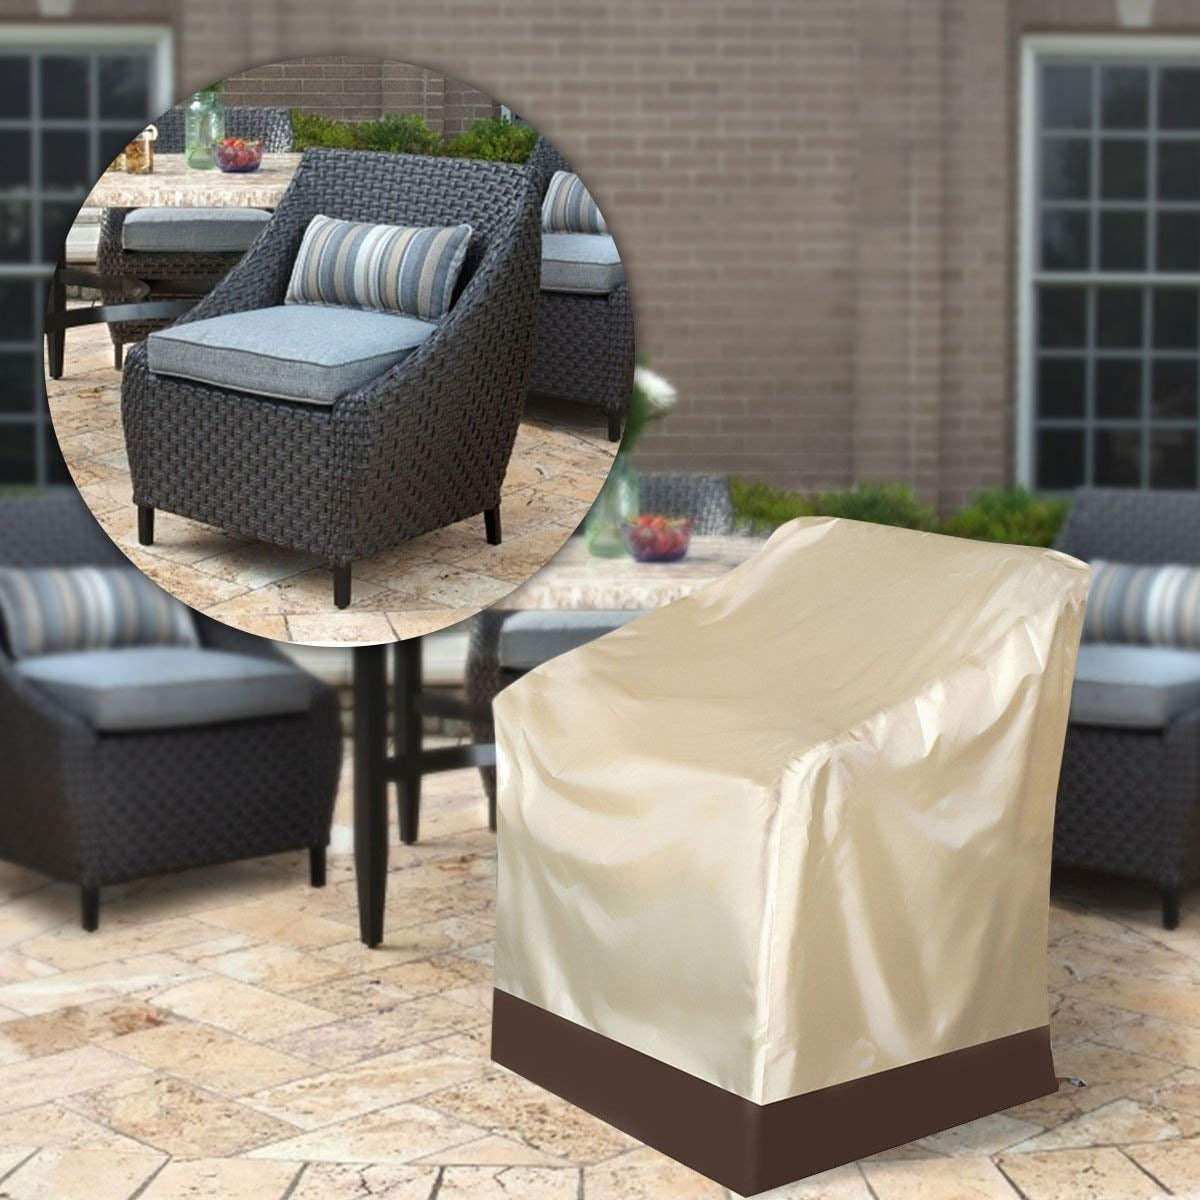 Waterproof Patio Chair Cover 28x31x40inch Heavy Duty Dust Rain Cover for Garden Yard Outdoor Patio Furniture Protective Cover w5bhj88 Chair Cover 1PCS 